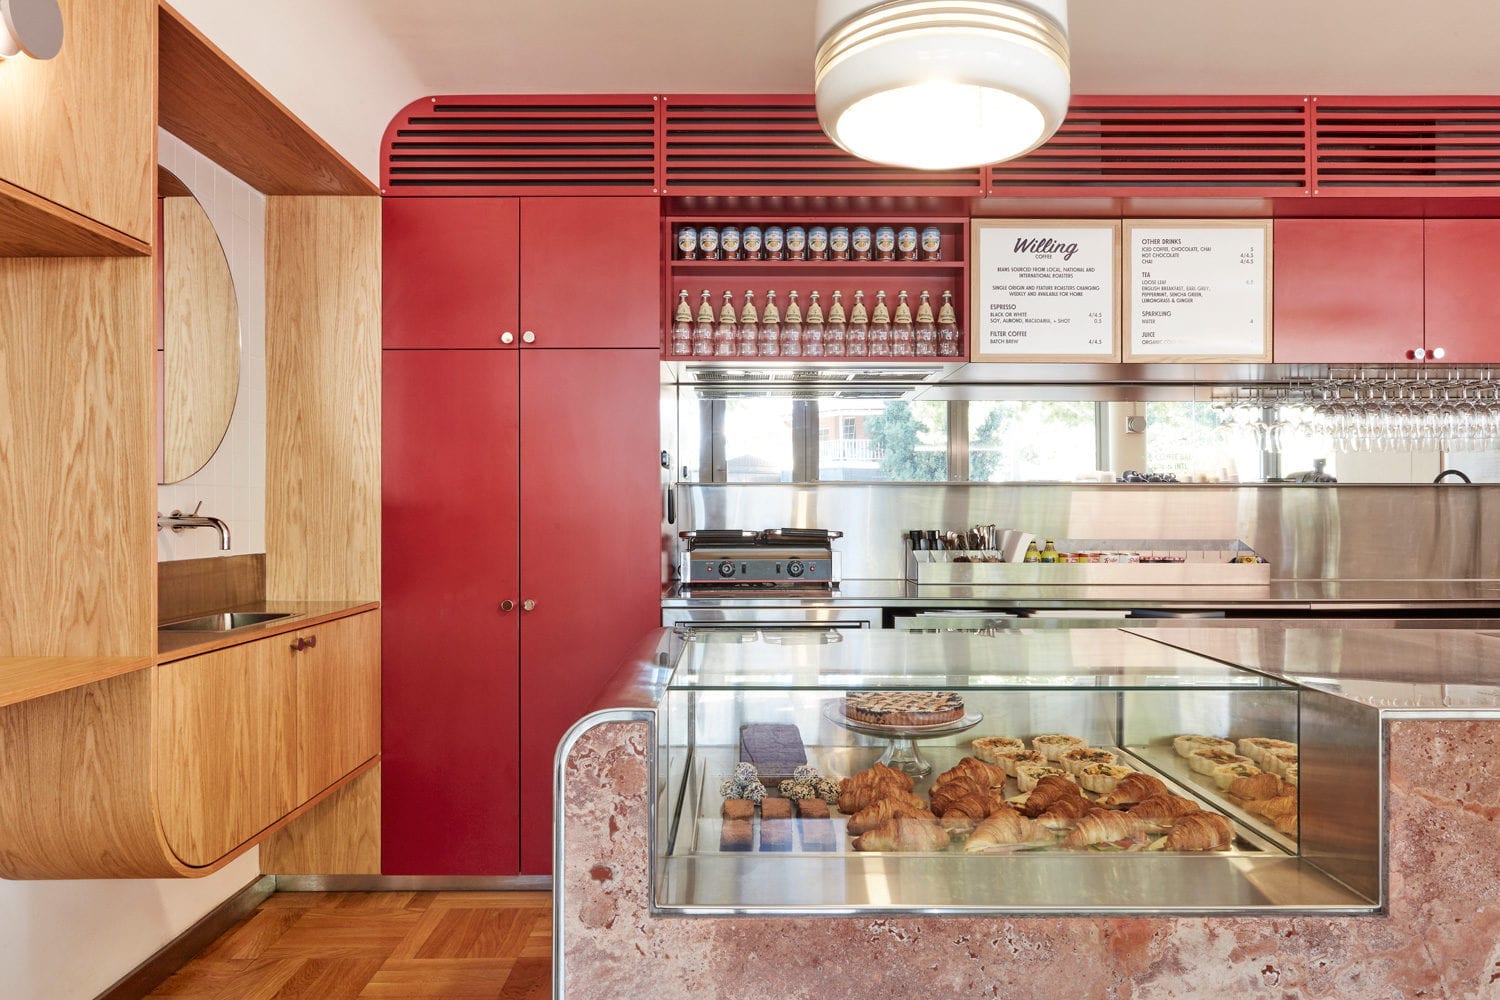 View of interior of a cafe overlooking a glass cabinet with baked goods.